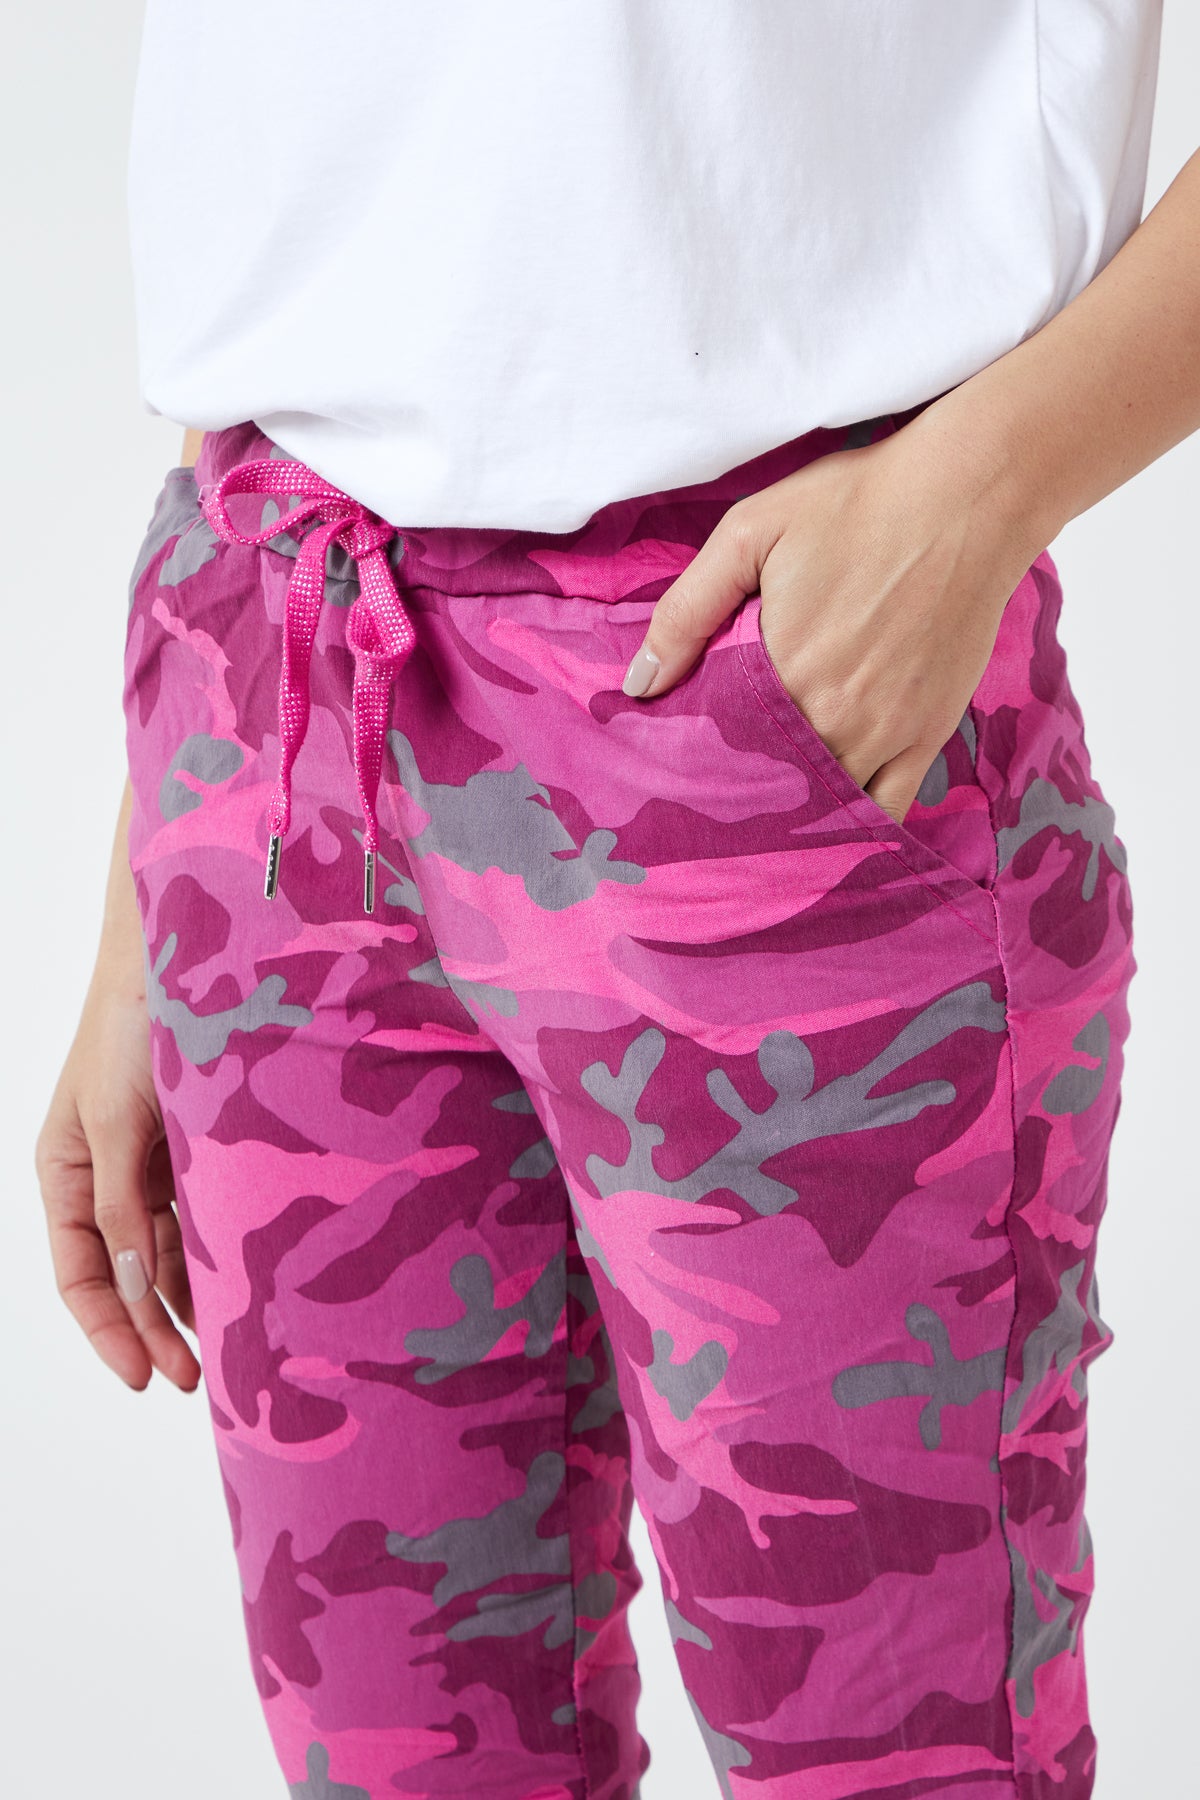 Buy Pink Camo Pants at Army Surplus World